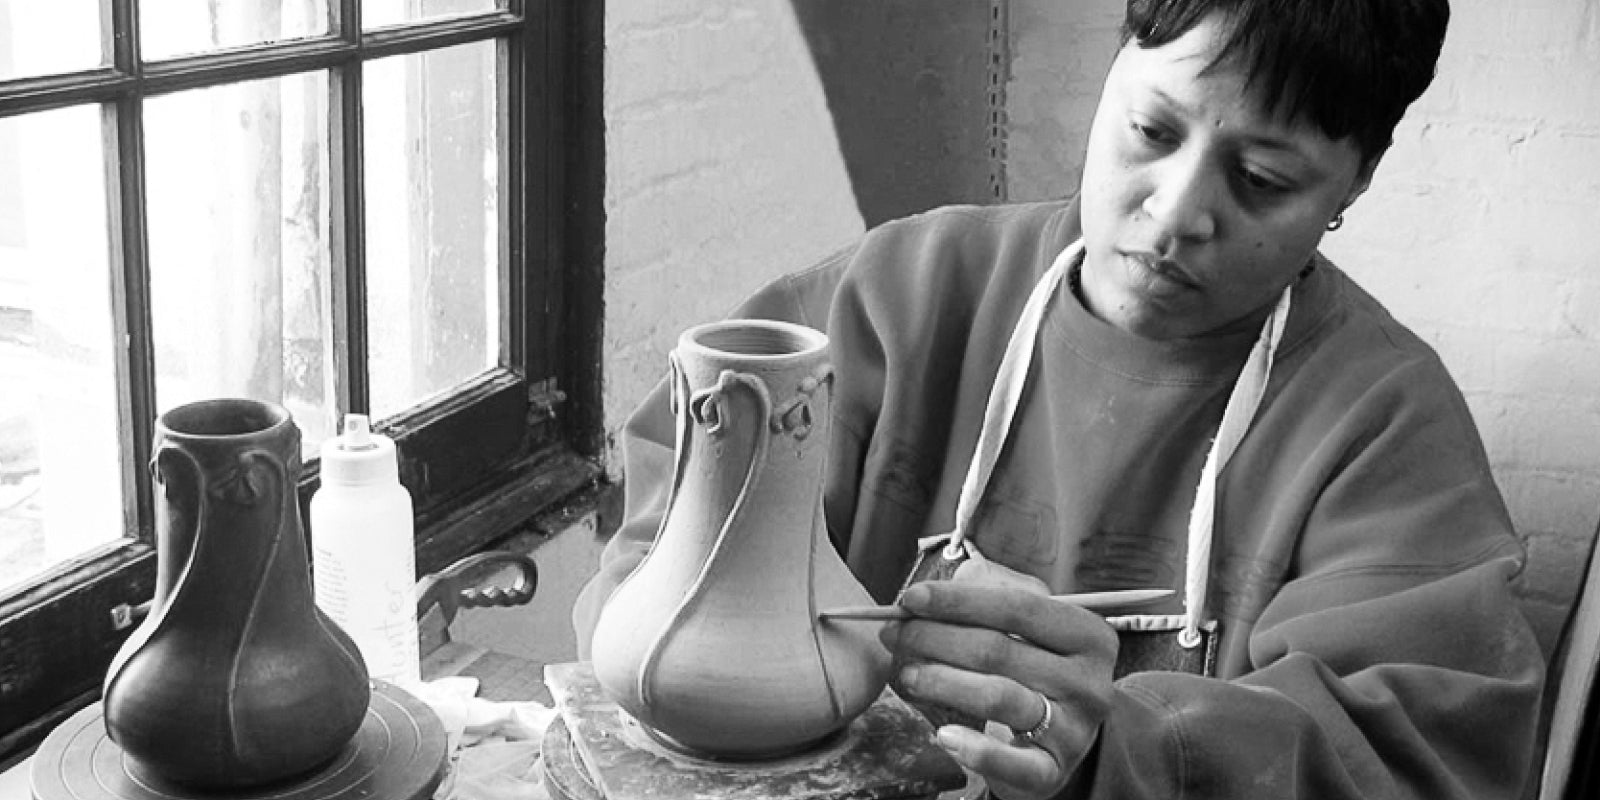 Master Mold Maker Sherlyn sculpting what would become the Snowdrop vase in production present-day.